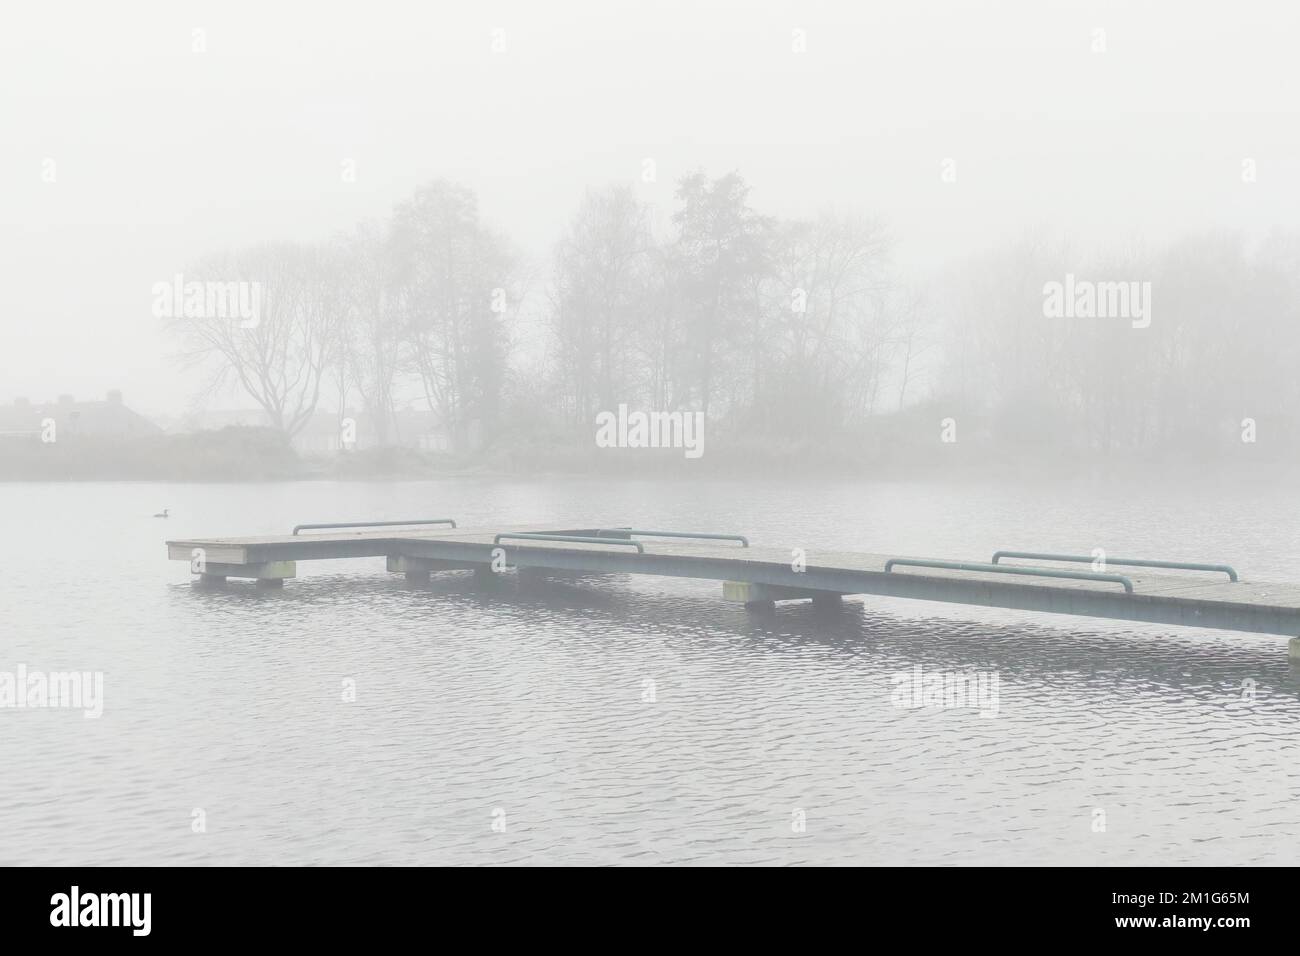 Jetty in the water of a lake in foggy conditions Stock Photo